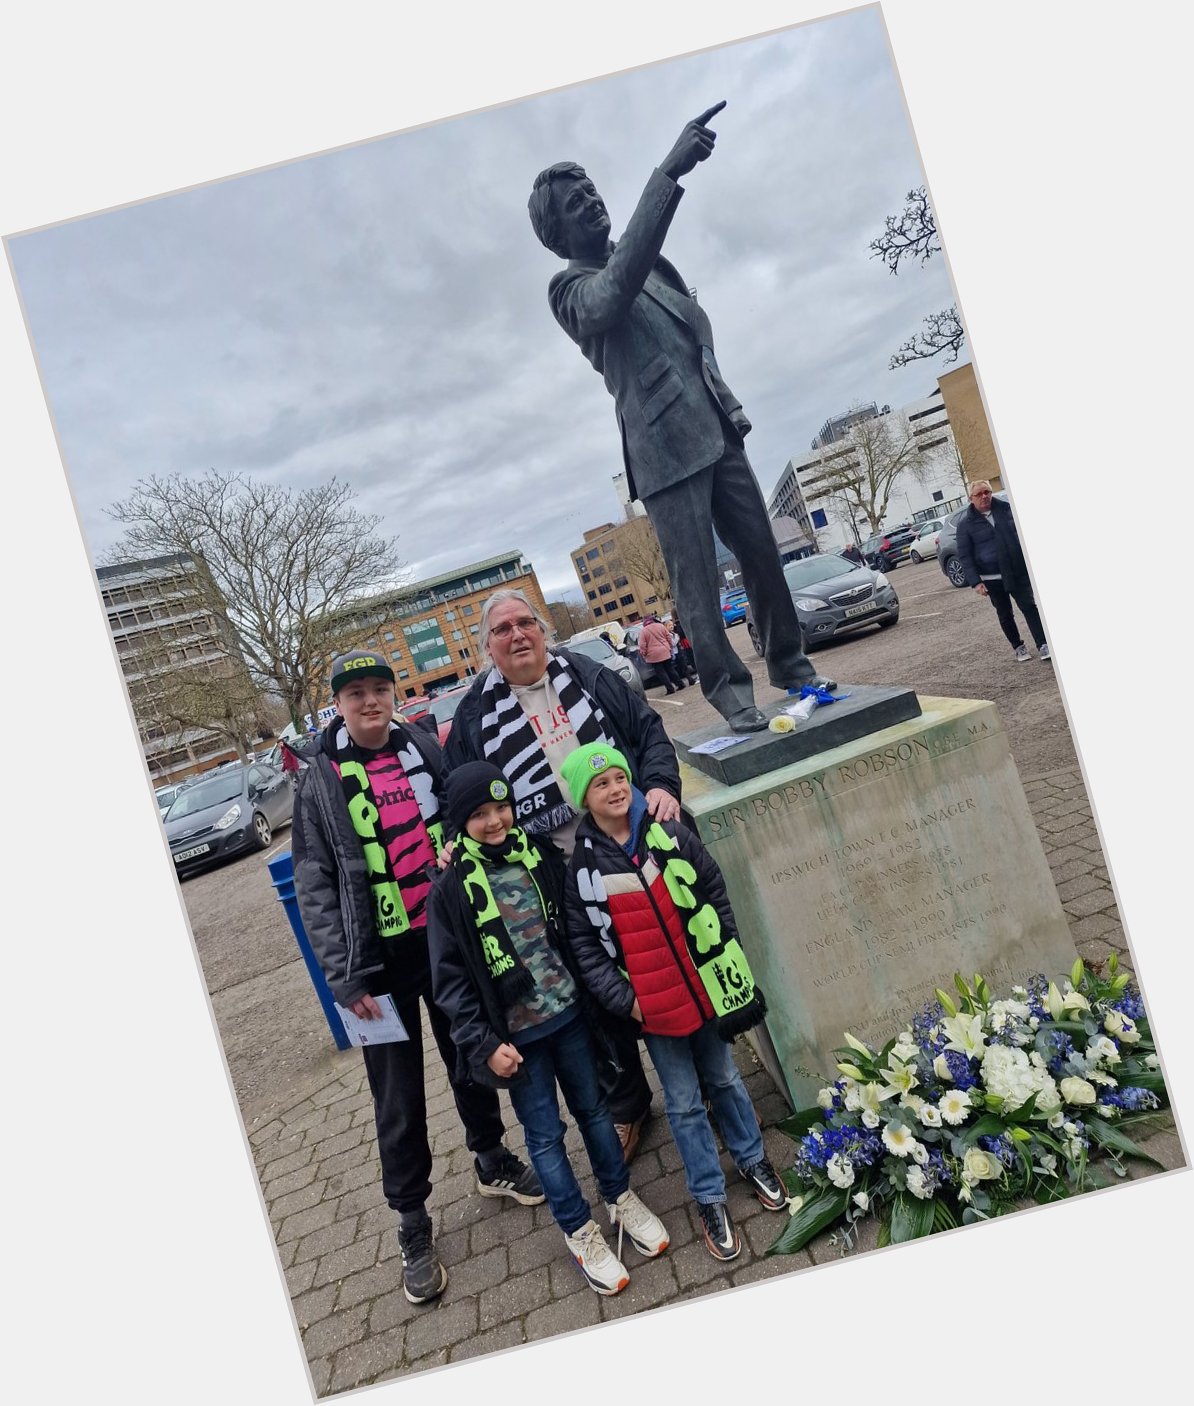 Some top statues in Ipswich. Happy 90th birthday Sir Bobby Robson. 